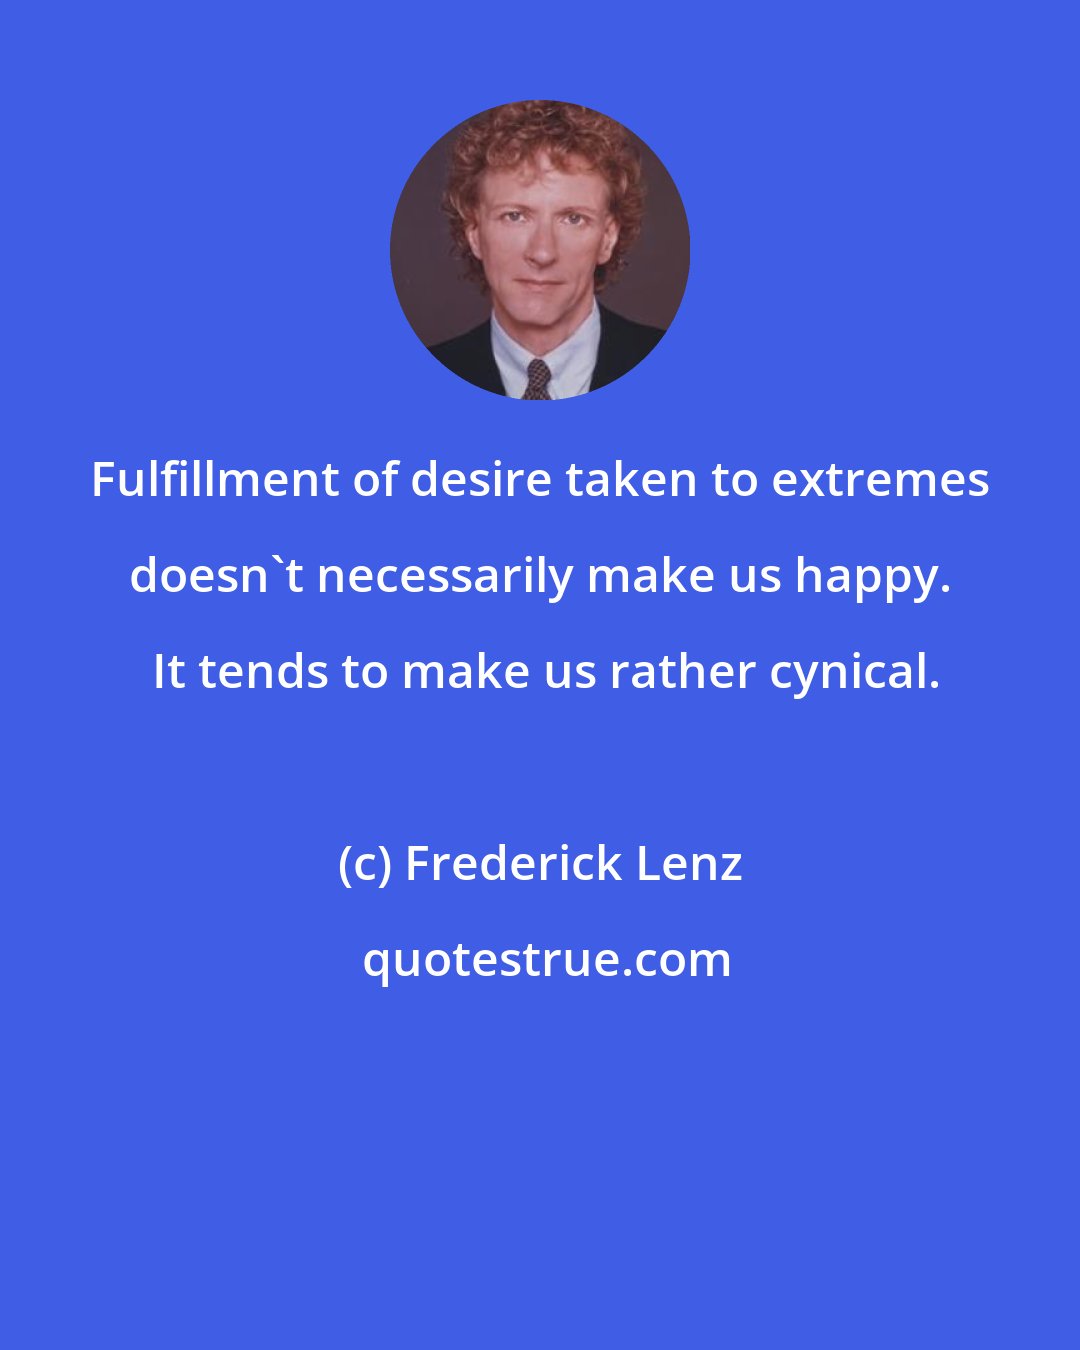 Frederick Lenz: Fulfillment of desire taken to extremes doesn't necessarily make us happy.  It tends to make us rather cynical.